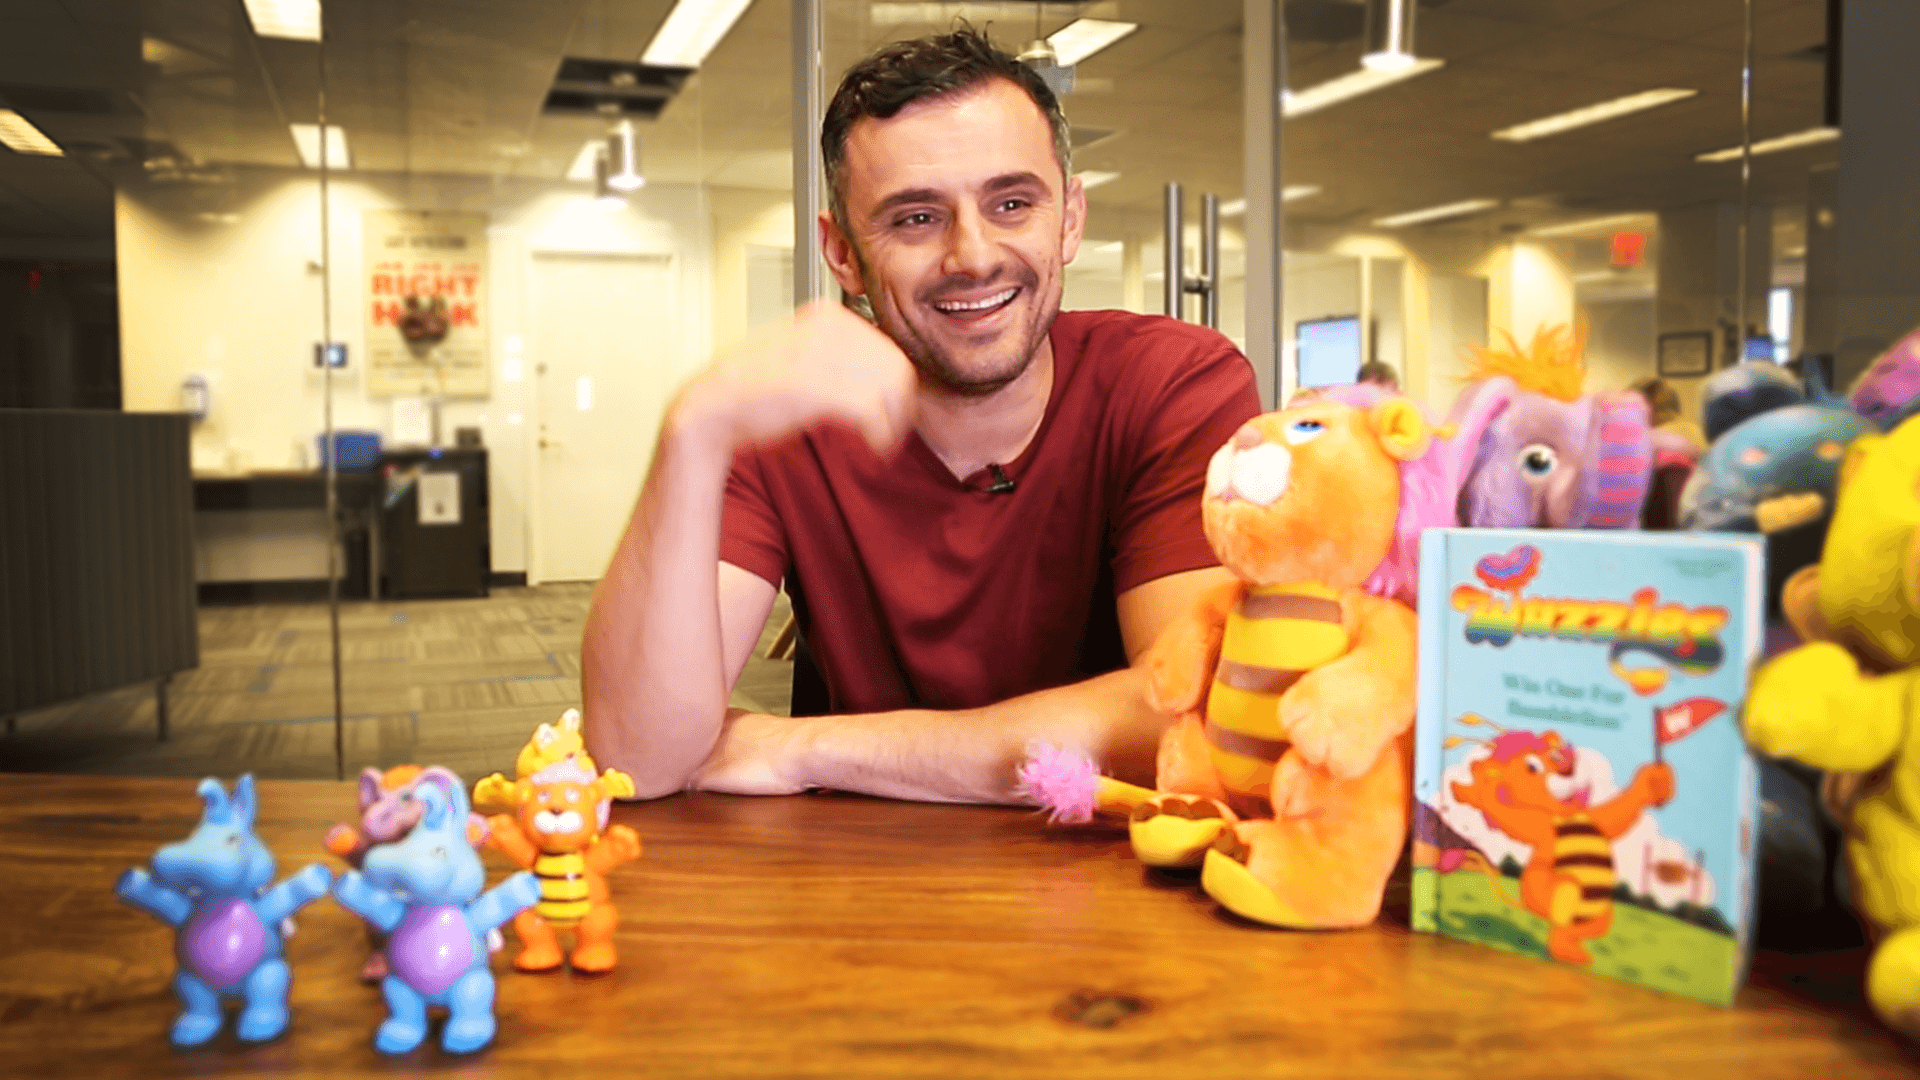 Gary Vaynerchuk and his Wuzzle collection